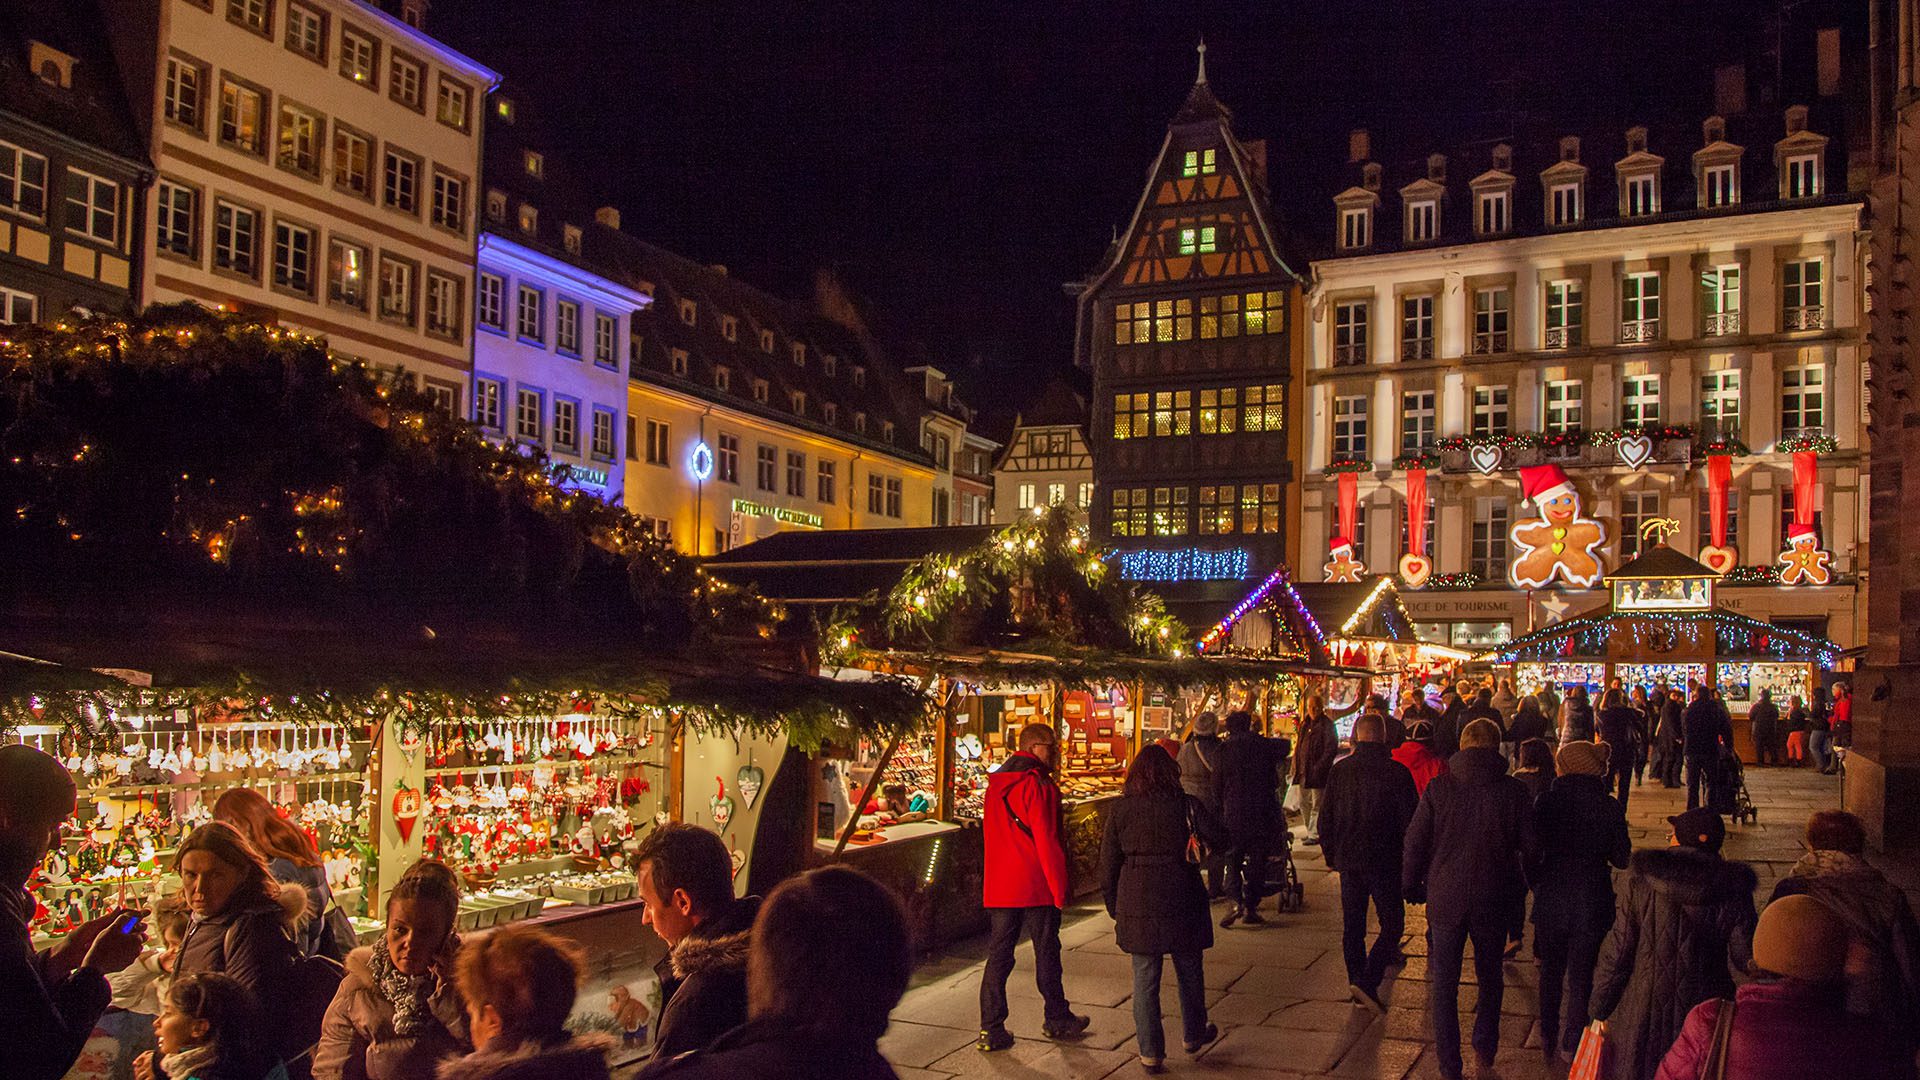 Your complete guide to Strasbourg’s Christmas Market